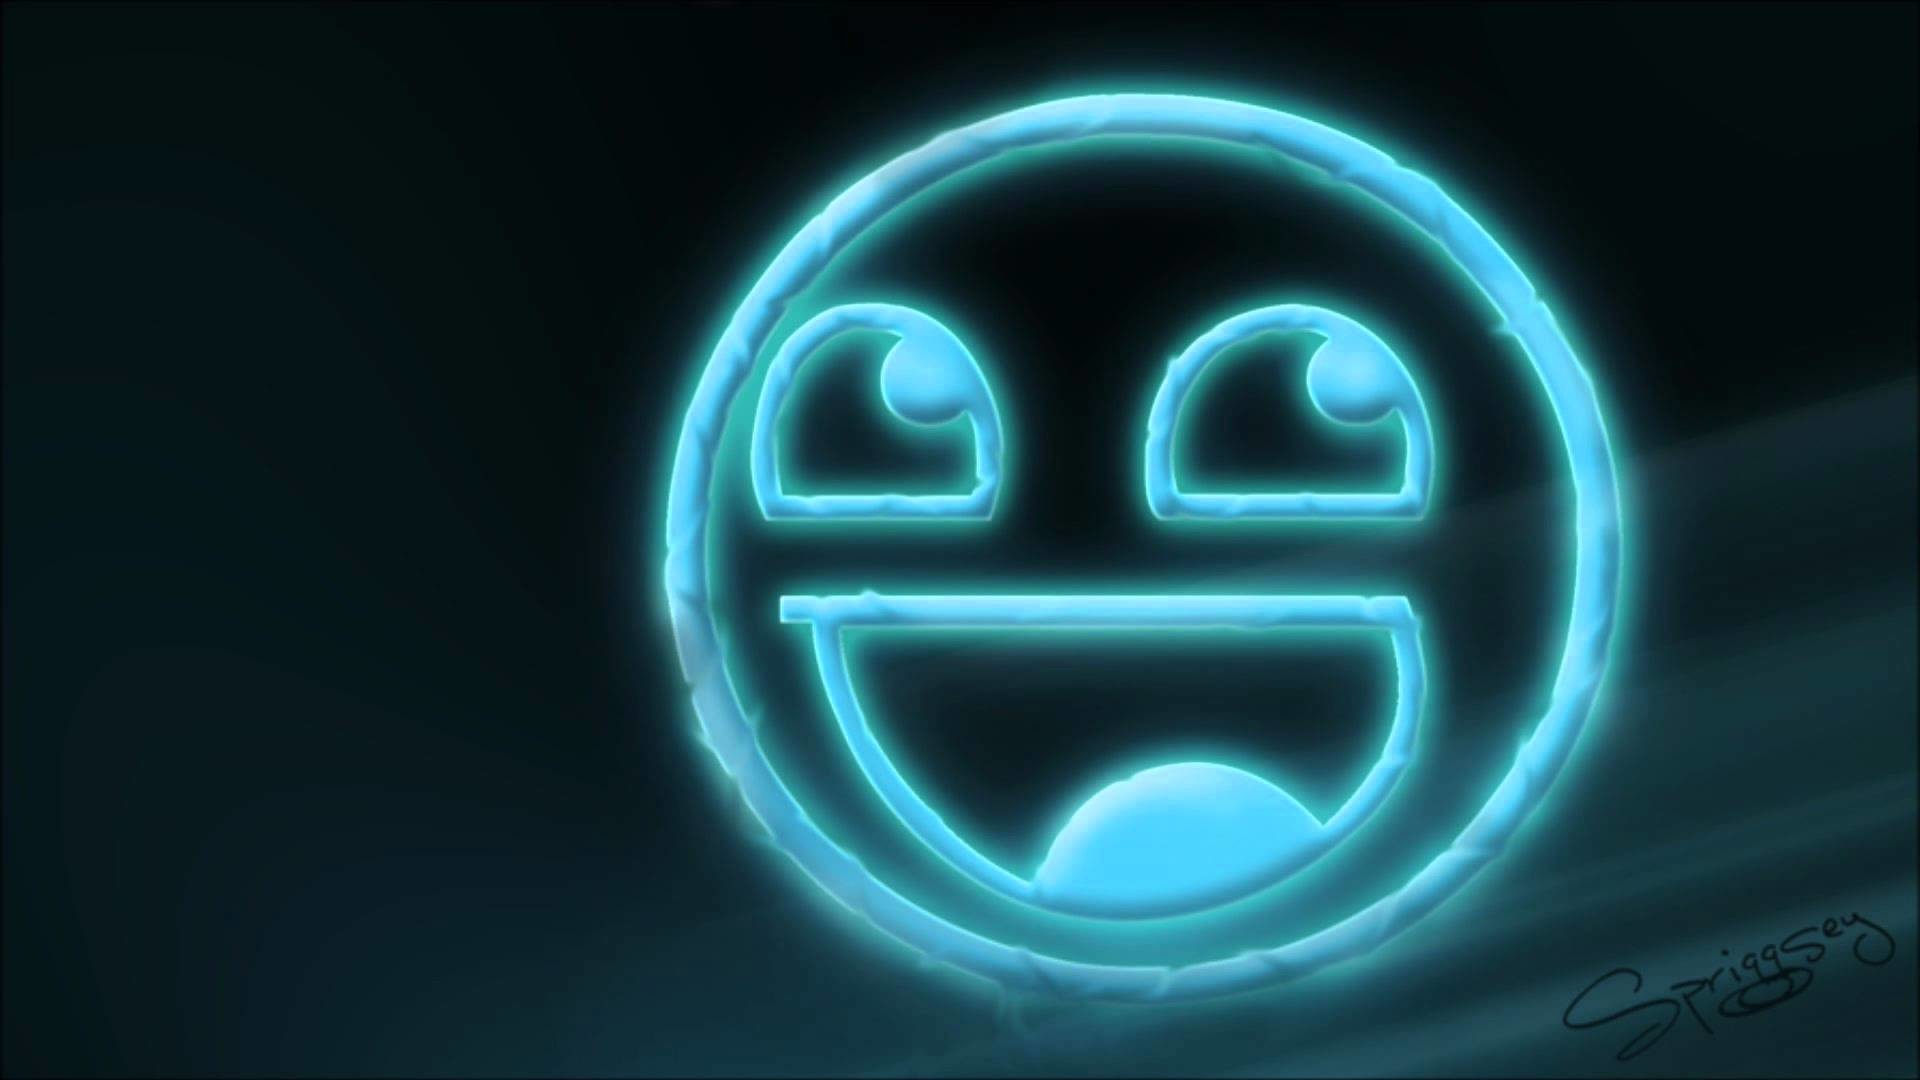 1920x1080 awesome face song (remix)